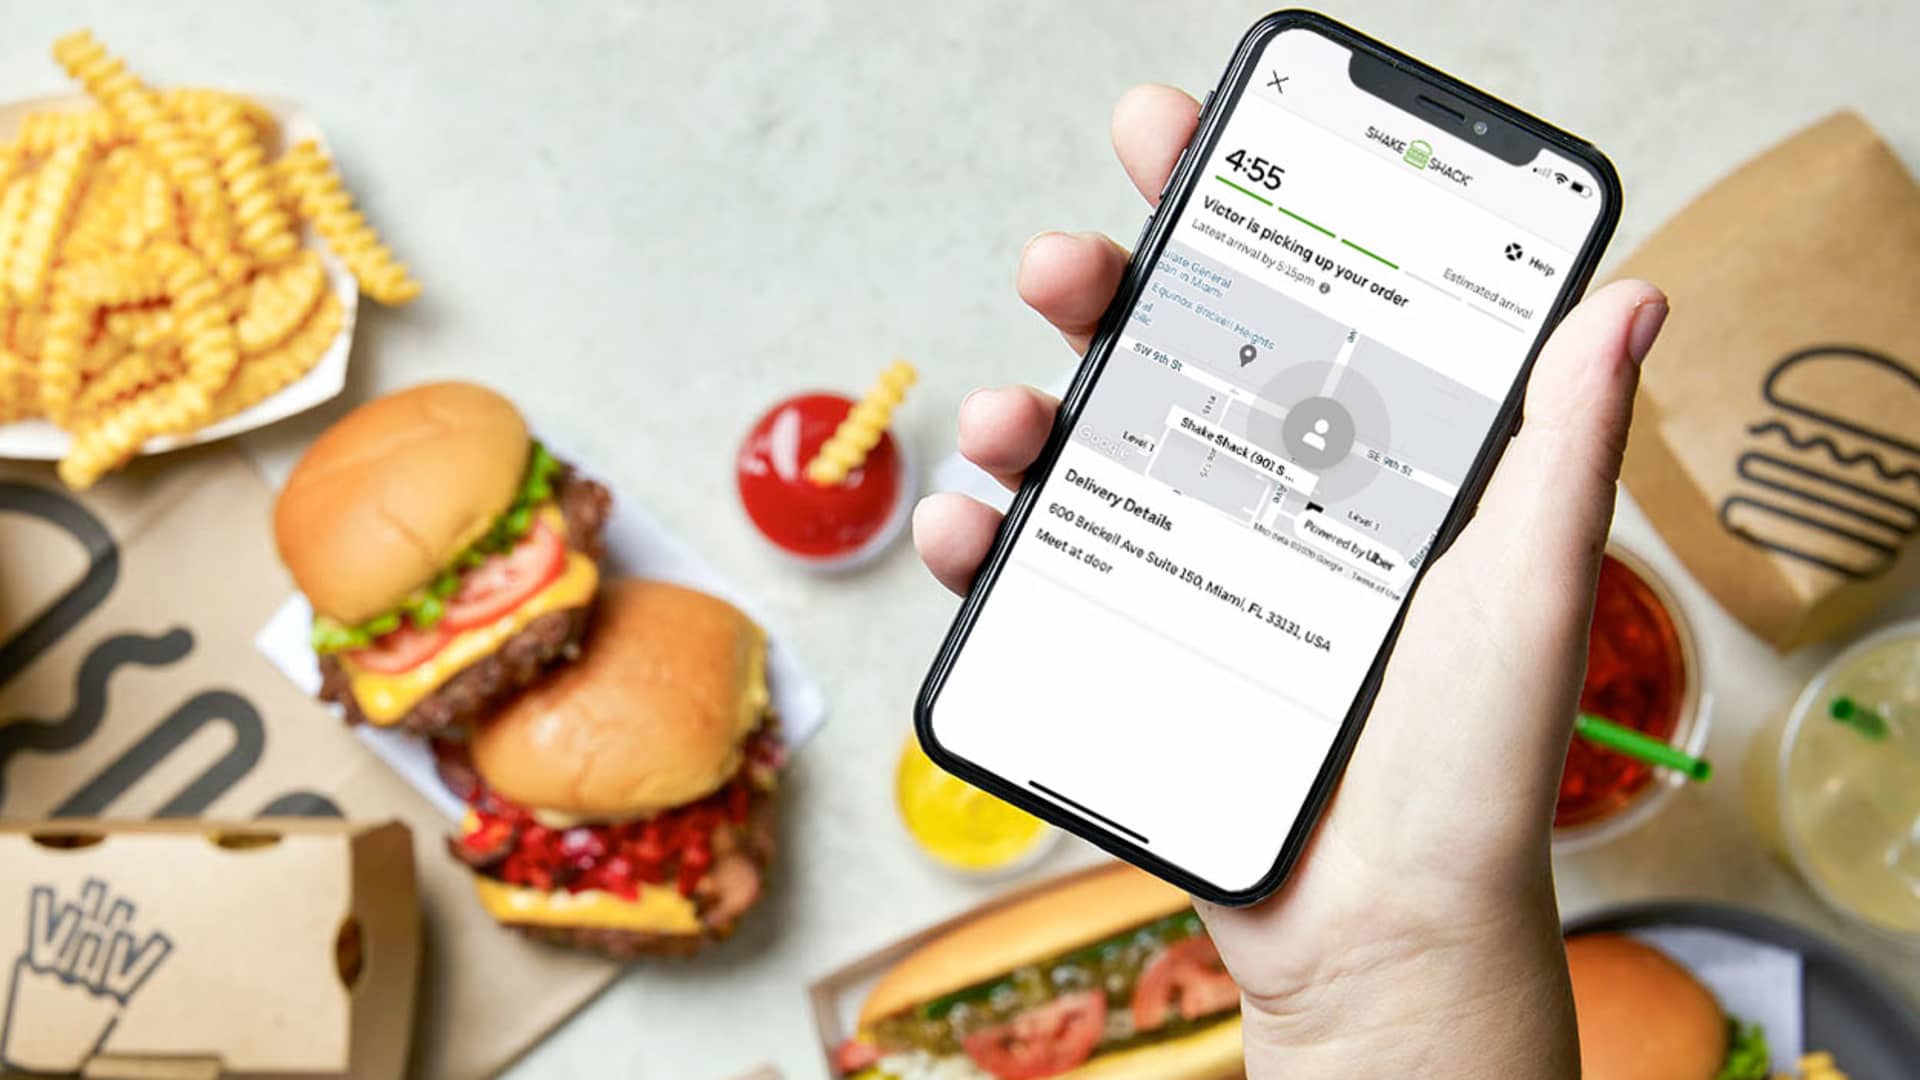 Shake Shack is rolling out its own nationwide delivery service in partnership with Uber Eats.